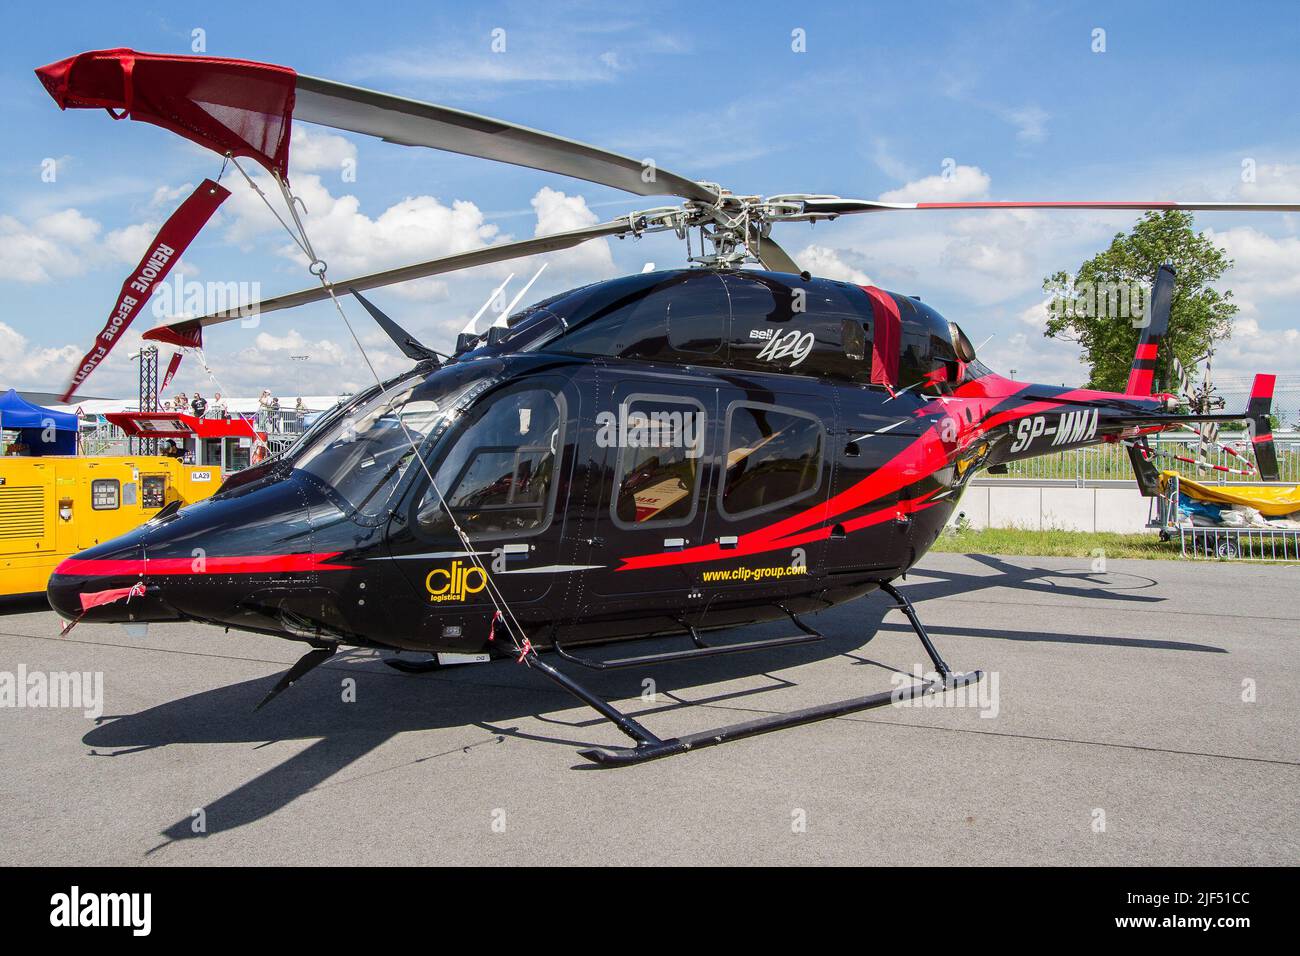 Brand new Bell 429 helicopter sitting on the apron at the exhibition in Berlin Stock Photo